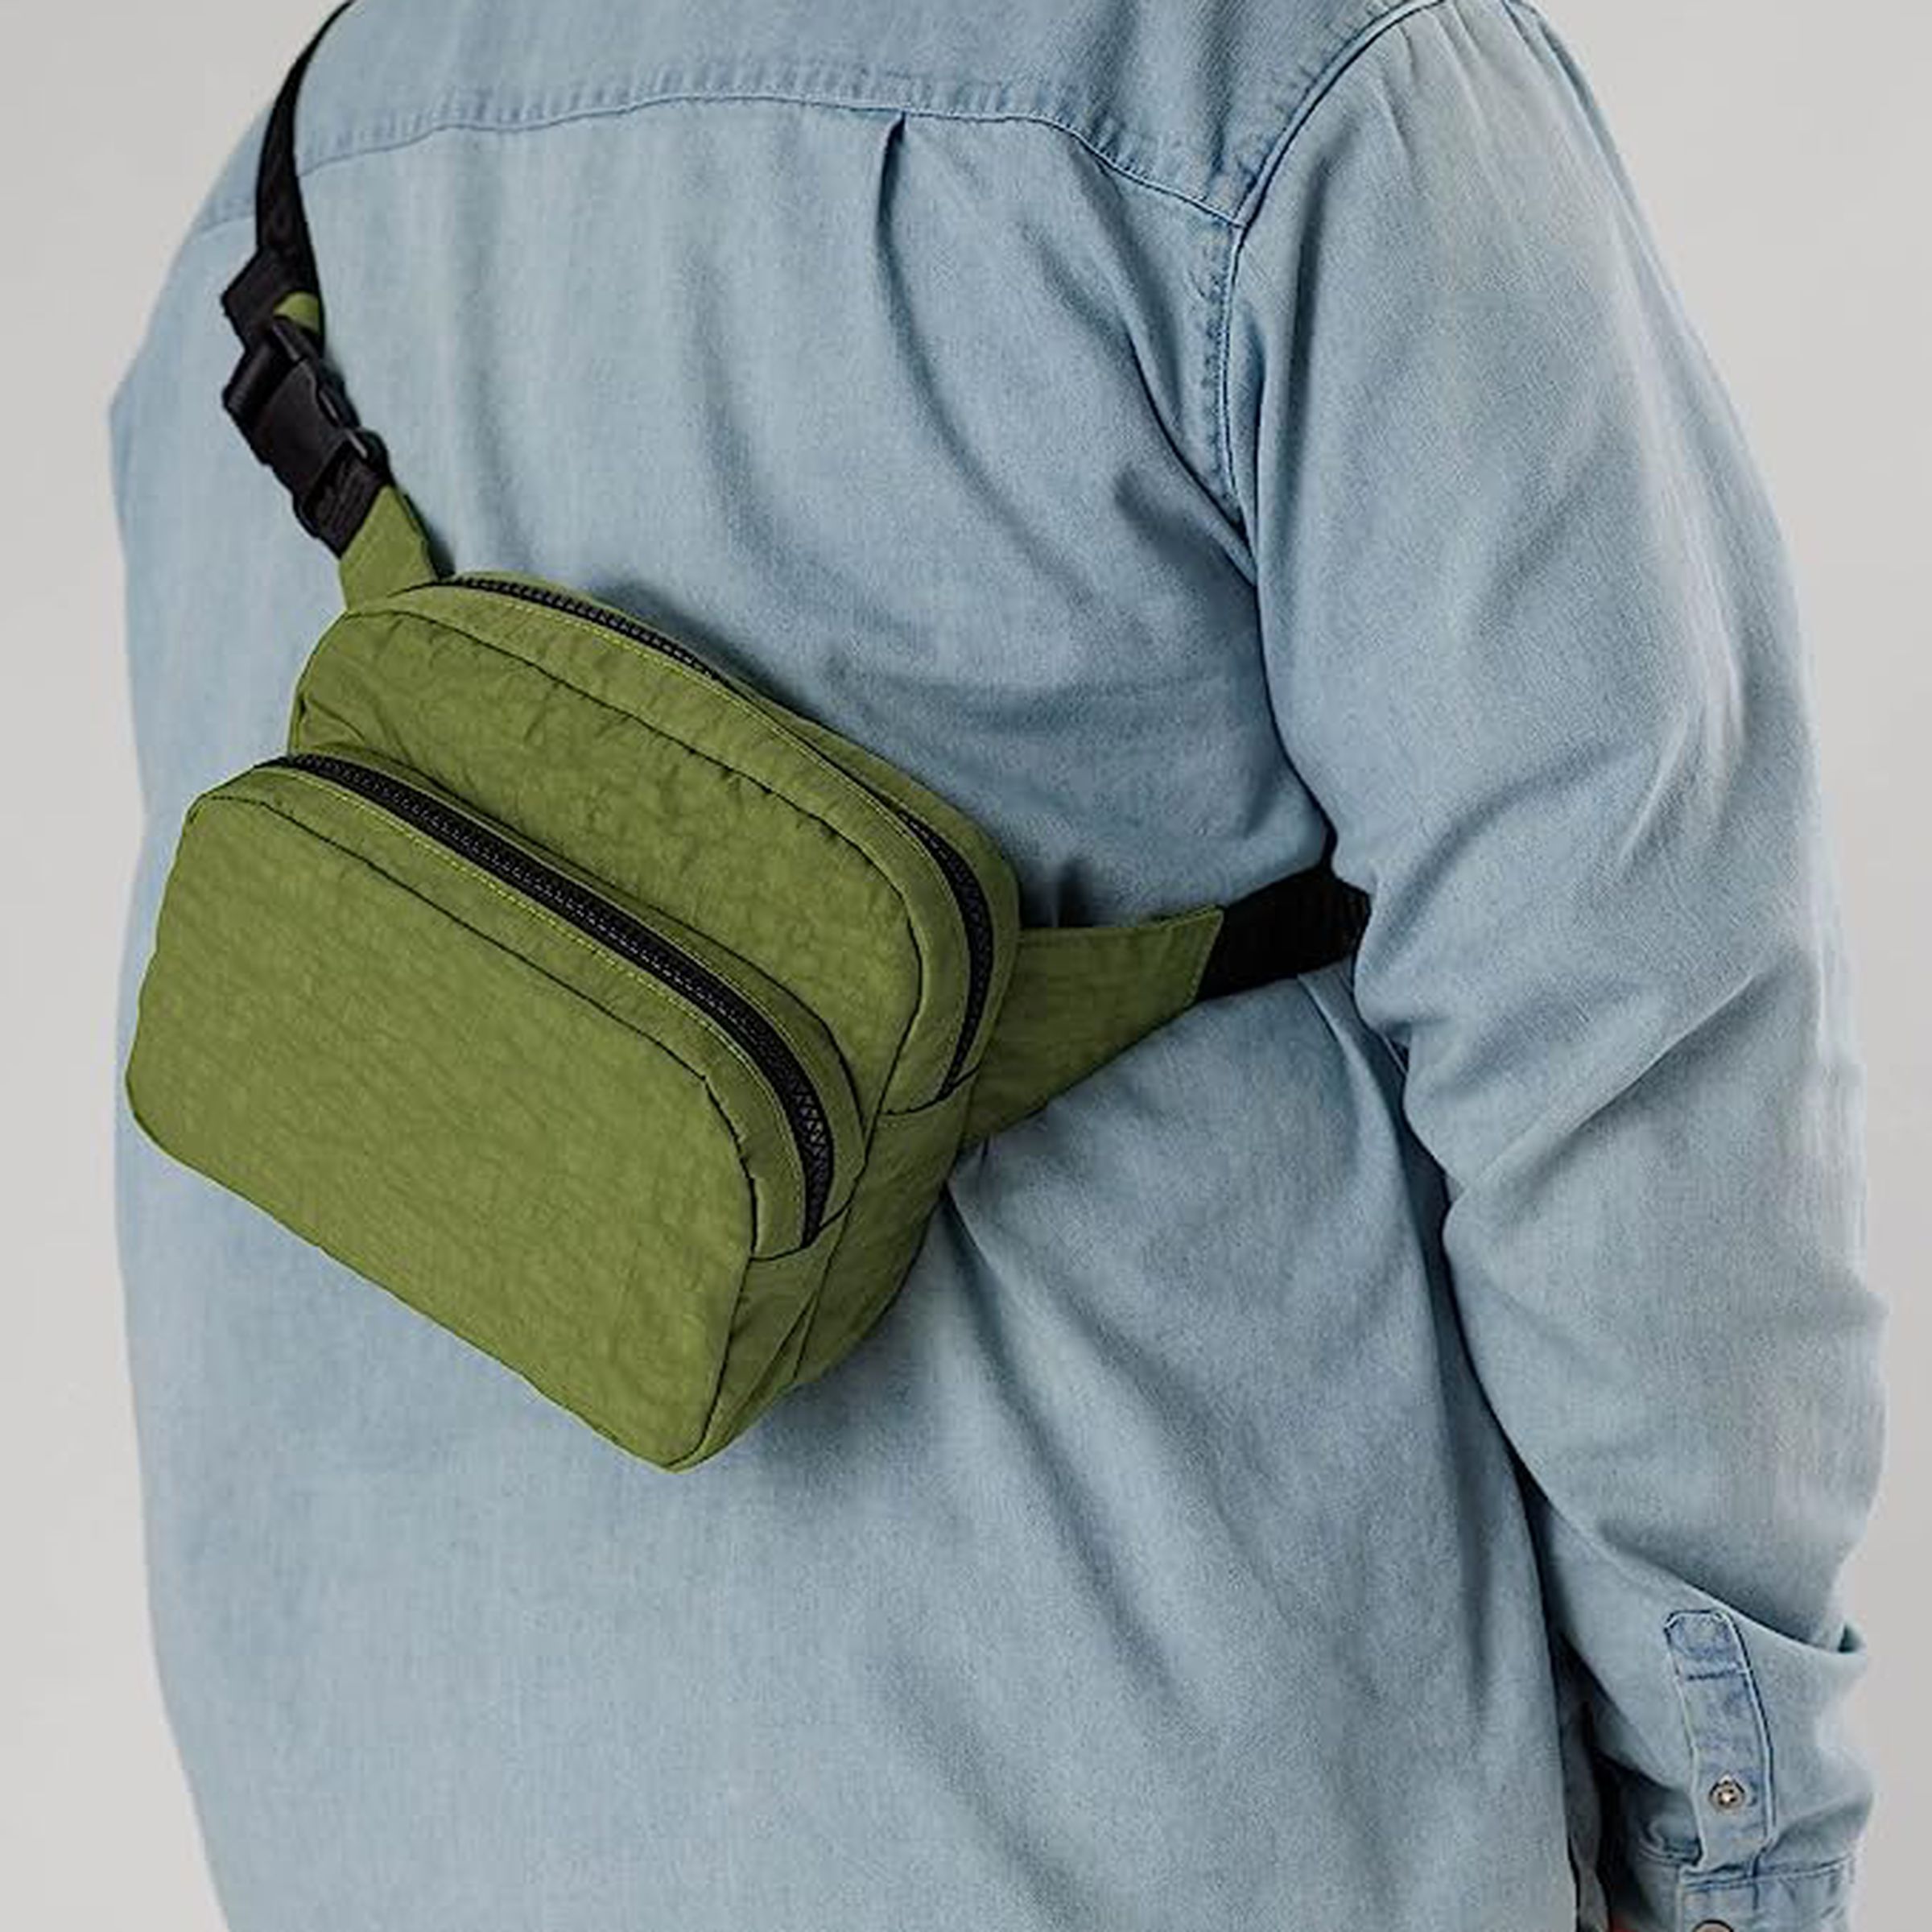 Man wearing fanny pack around the shoulders and slung behind.